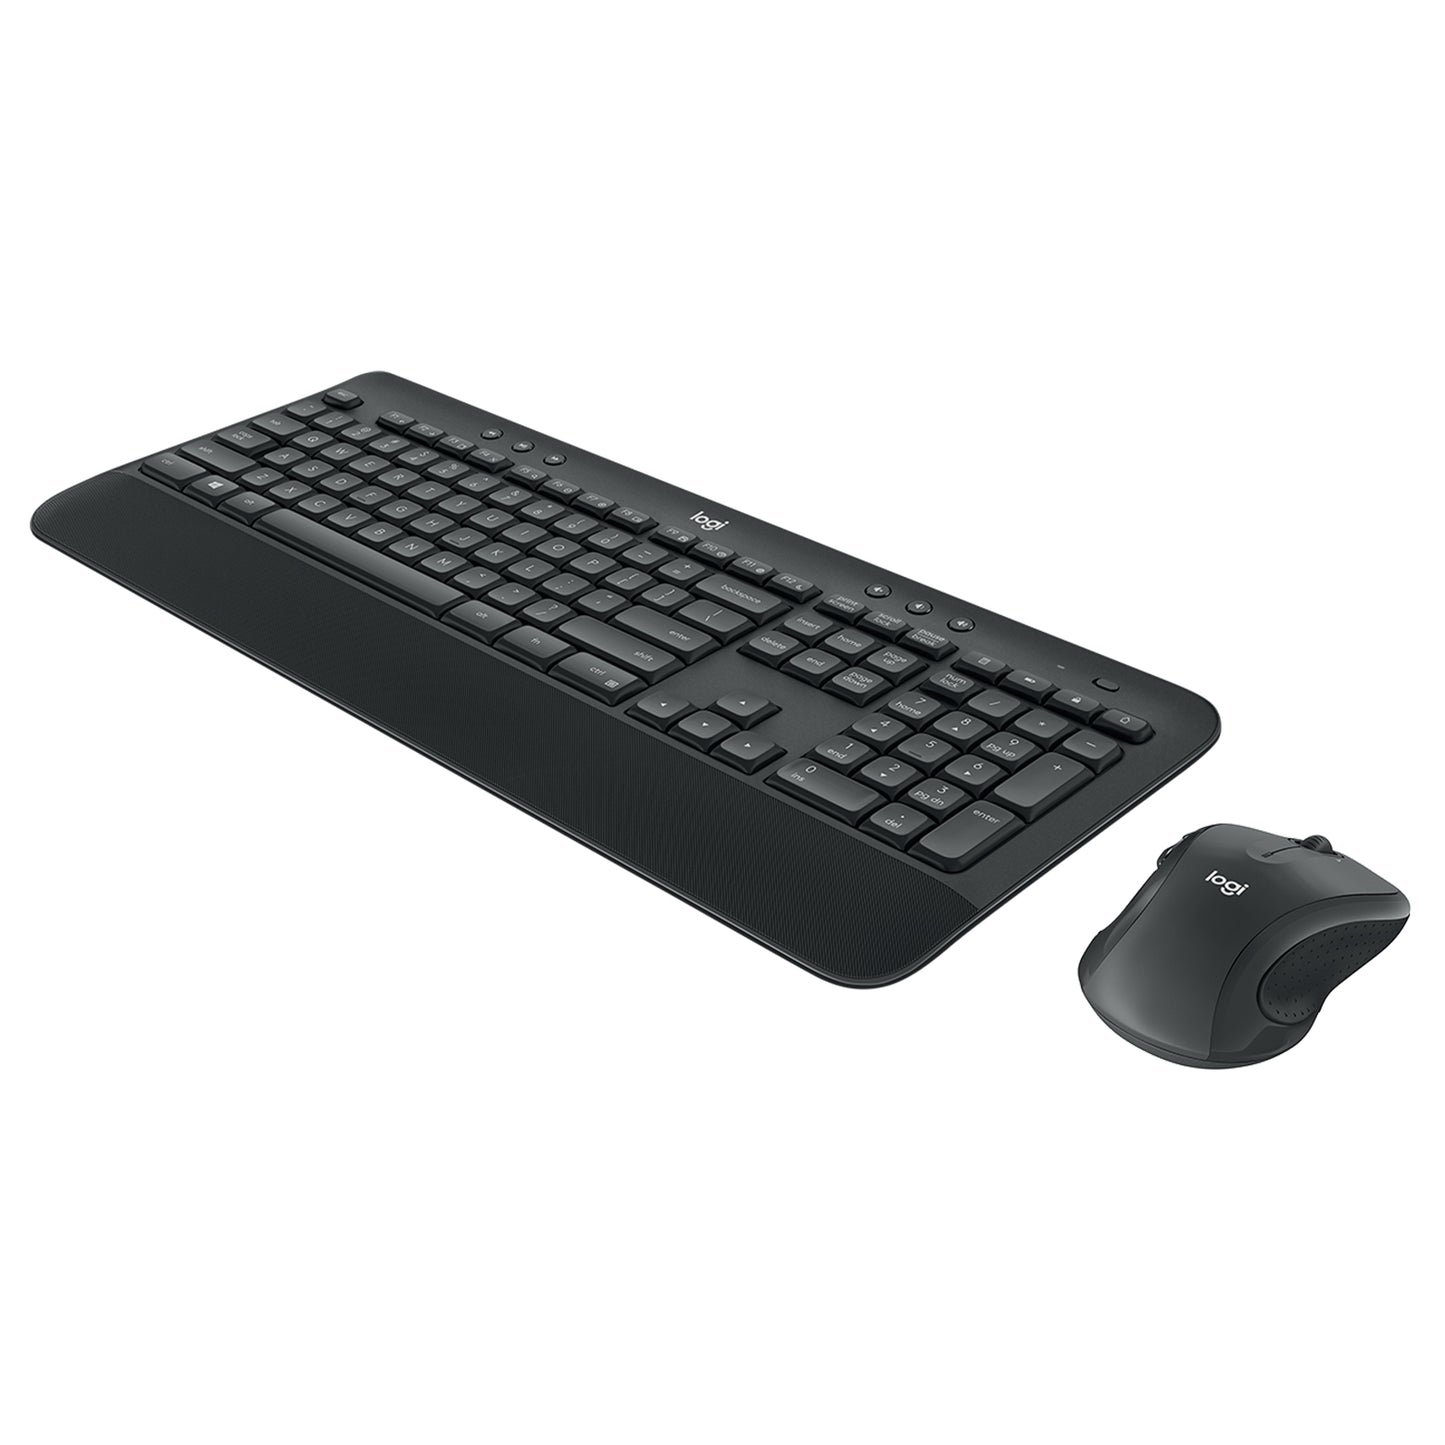 Logitech MK545 Advanced Wireless Keyboard and Mouse Combo with Precision Tracking, 2.4Ghz USB Nano Receiver, 10 meter Range